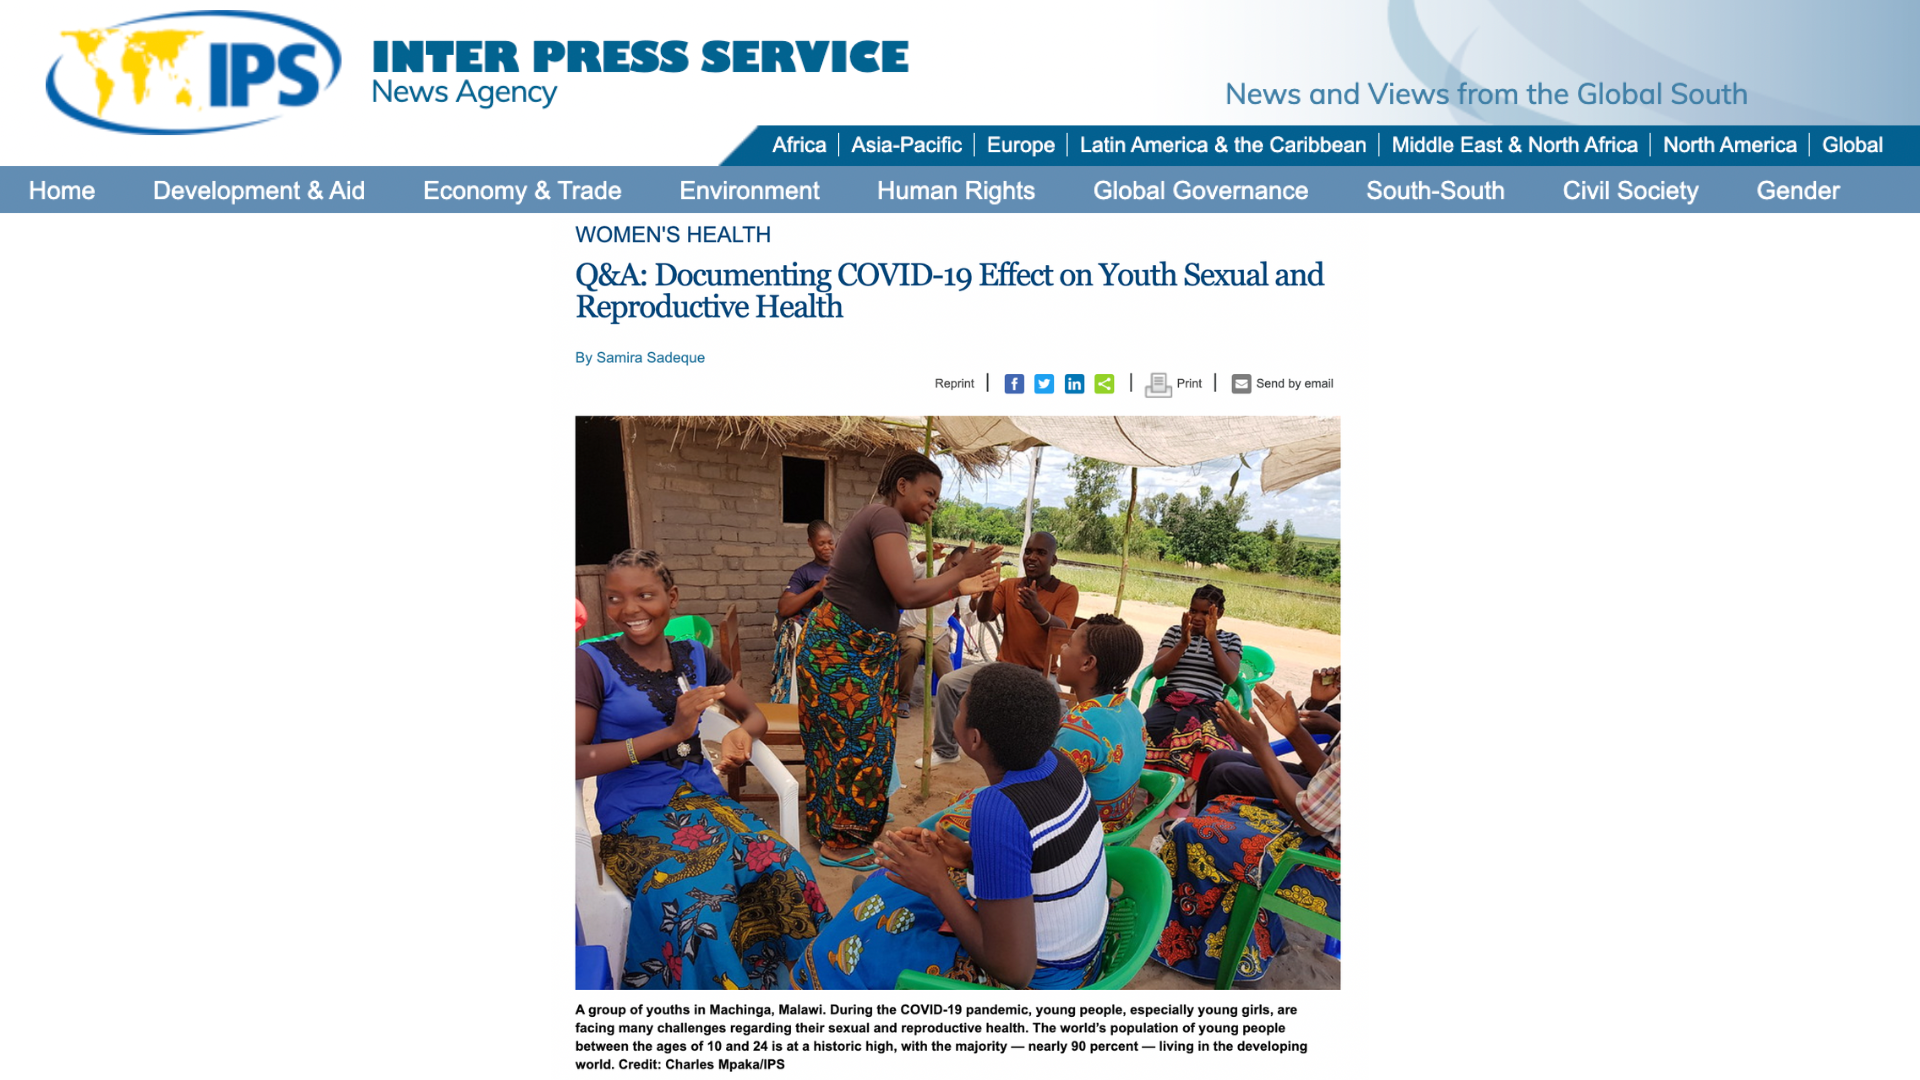 Q&A: Documenting COVID-19 Effect on Youth Sexual and Reproductive Health